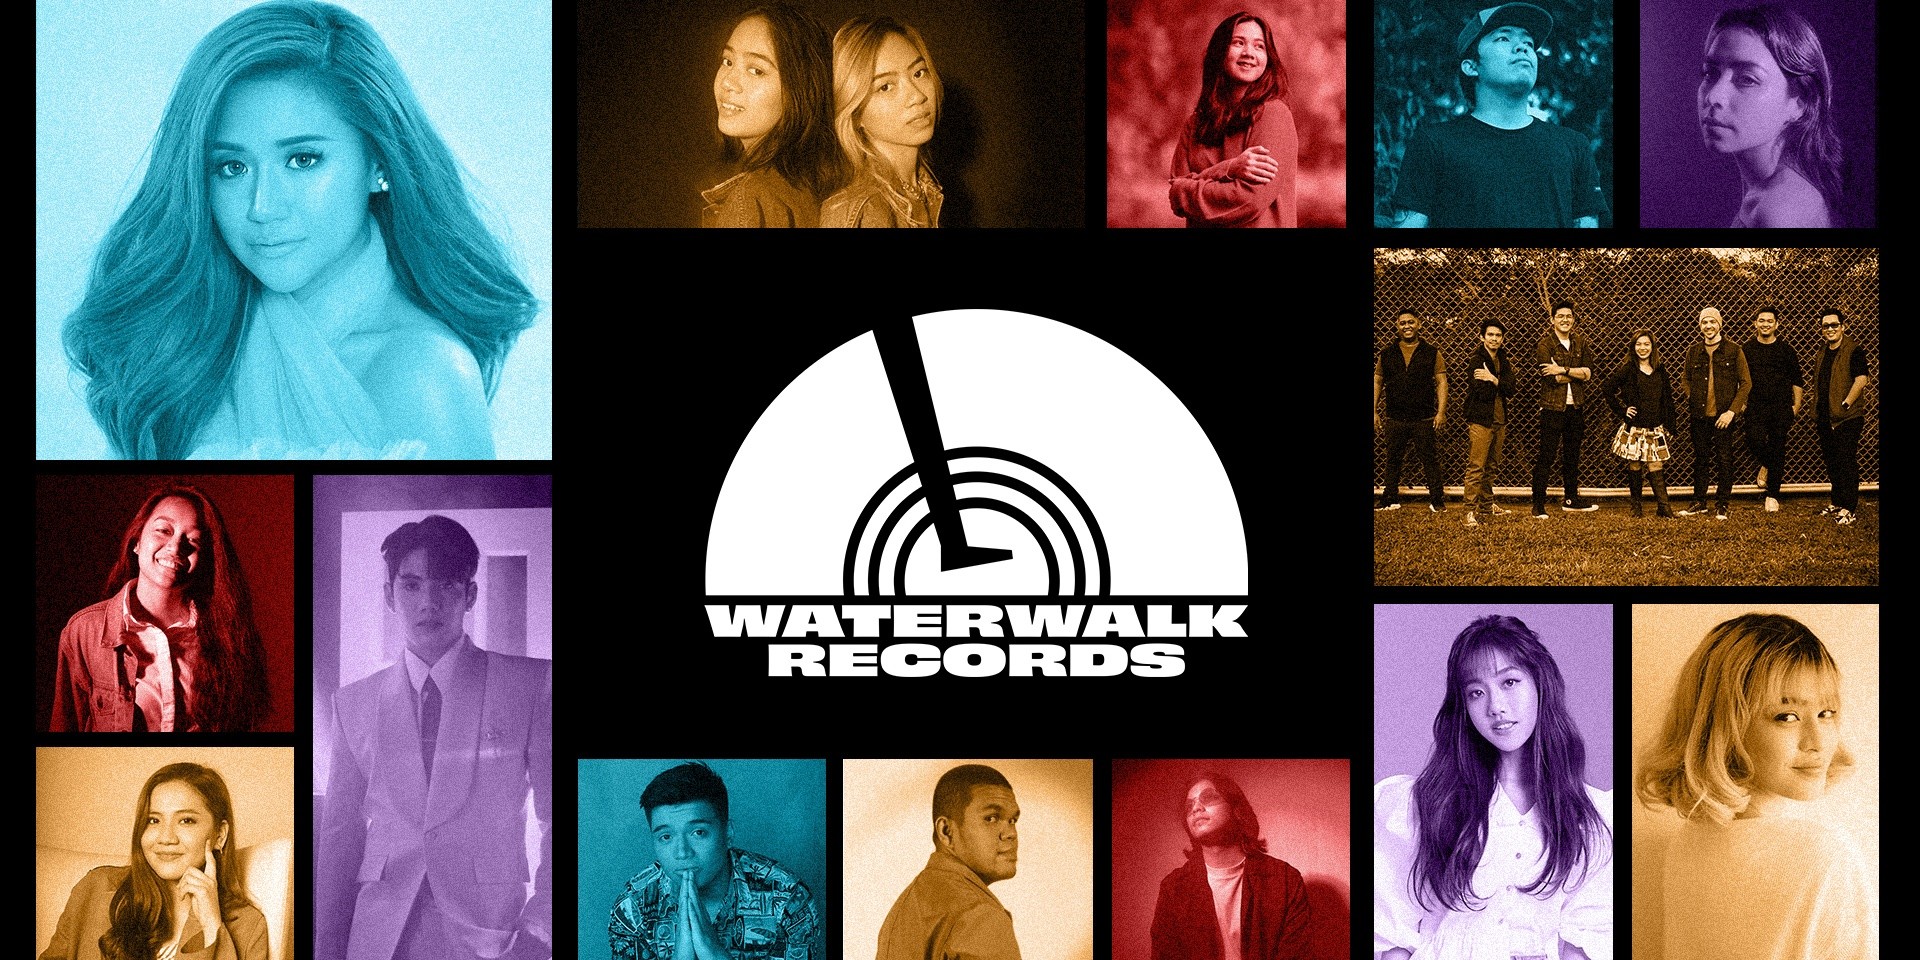 Sony Music launches Waterwalk Records with Morissette, Stell of SB19, Nathan Huang, and more